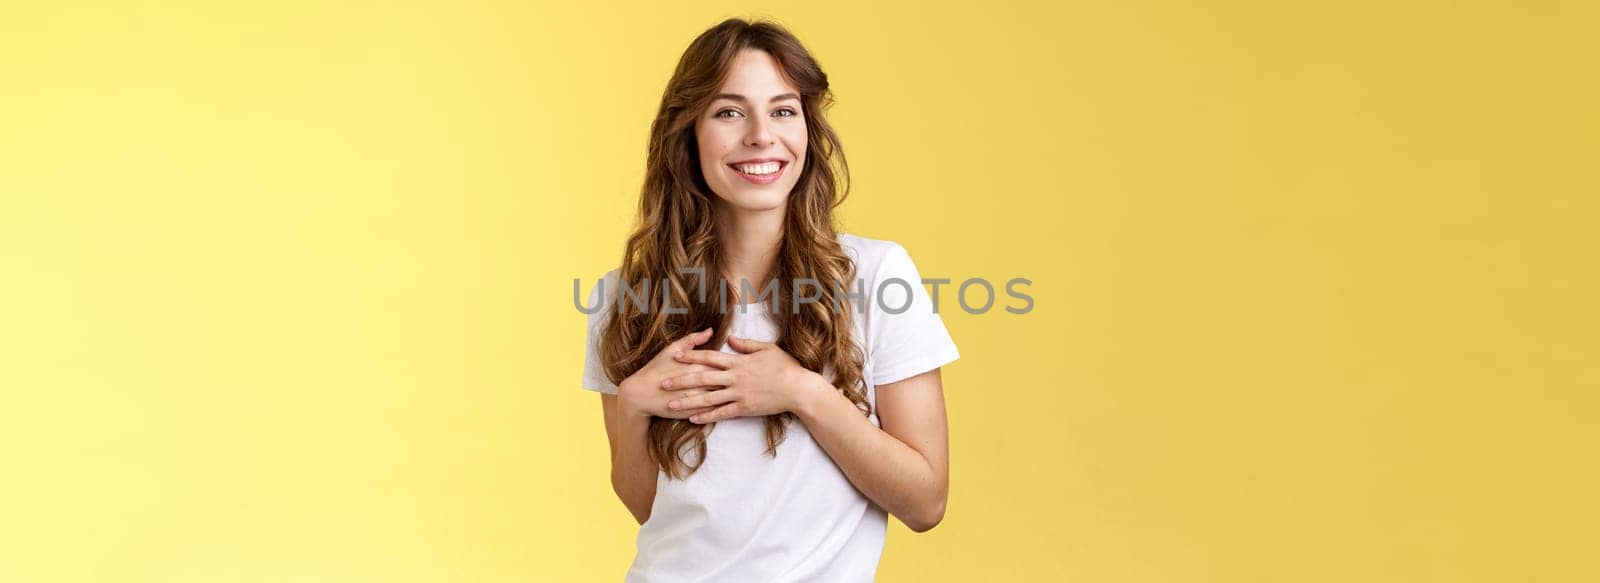 Lovely joyful tender feminine girlfriend long curly hairstyle touch heart feel heartbeat delighted receive lovely heartwarming gift smiling broadly satisfied flirty gazing camera yellow background.